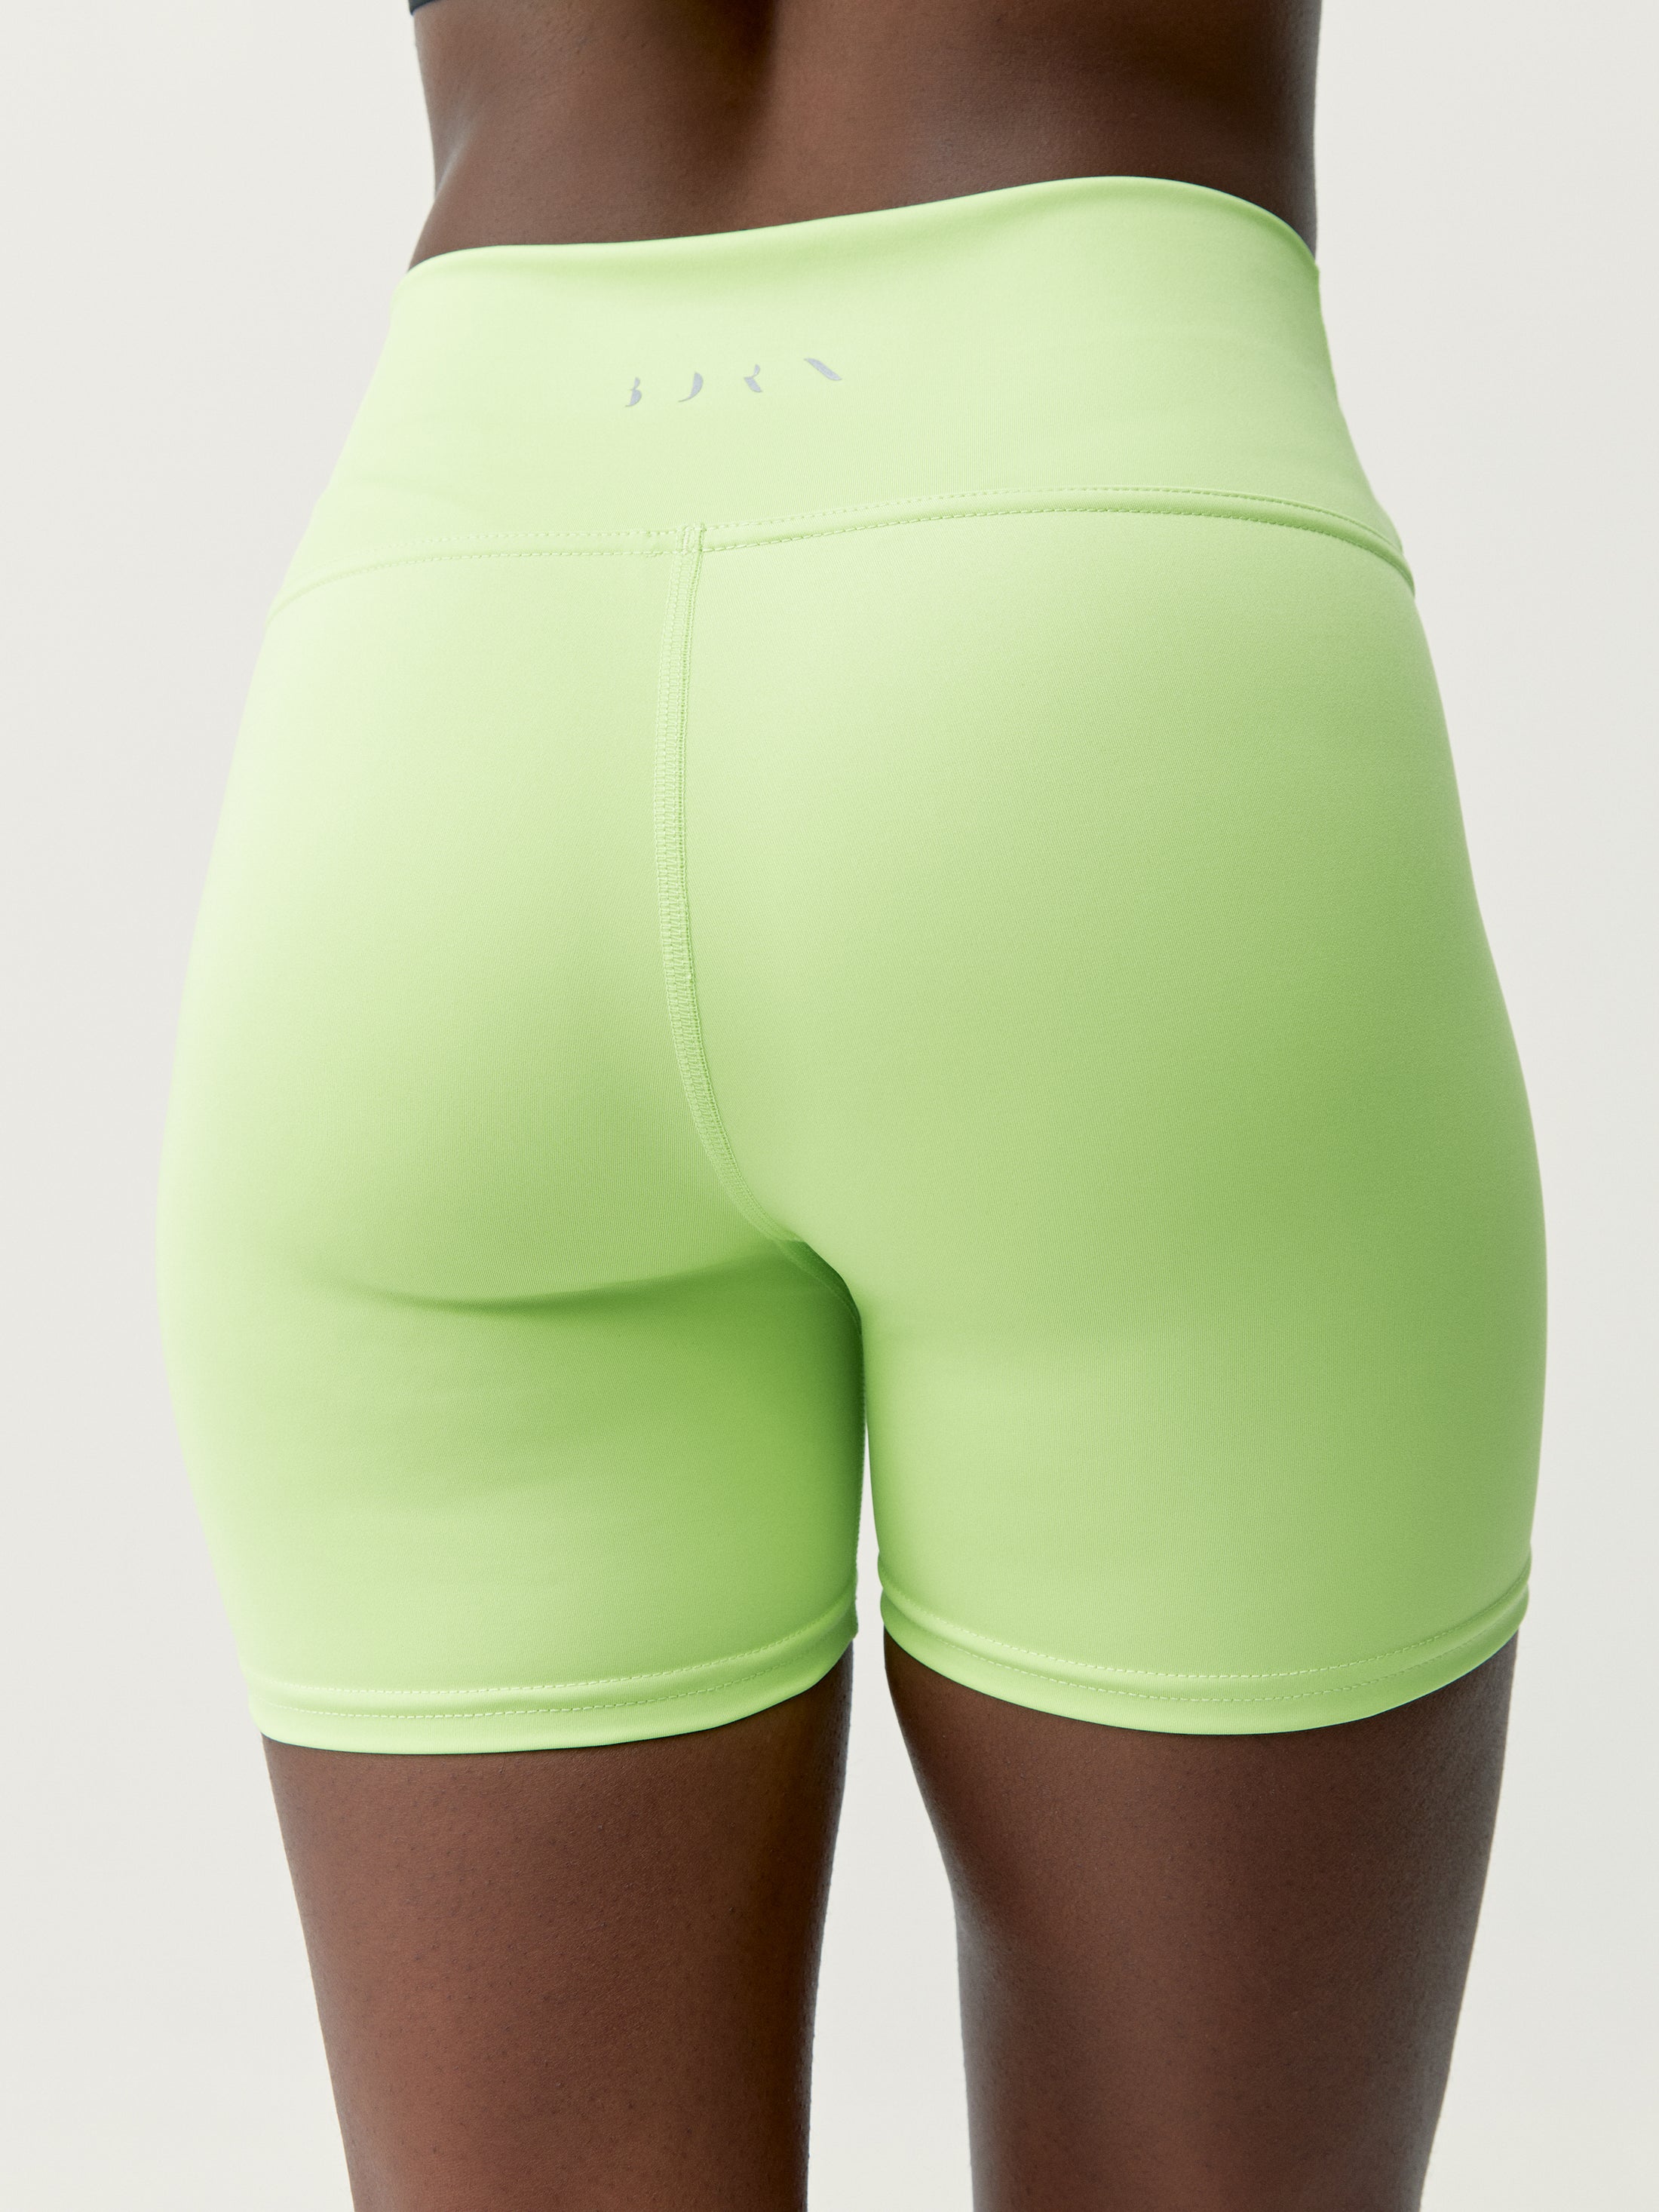 Volea Short in Lime Bright